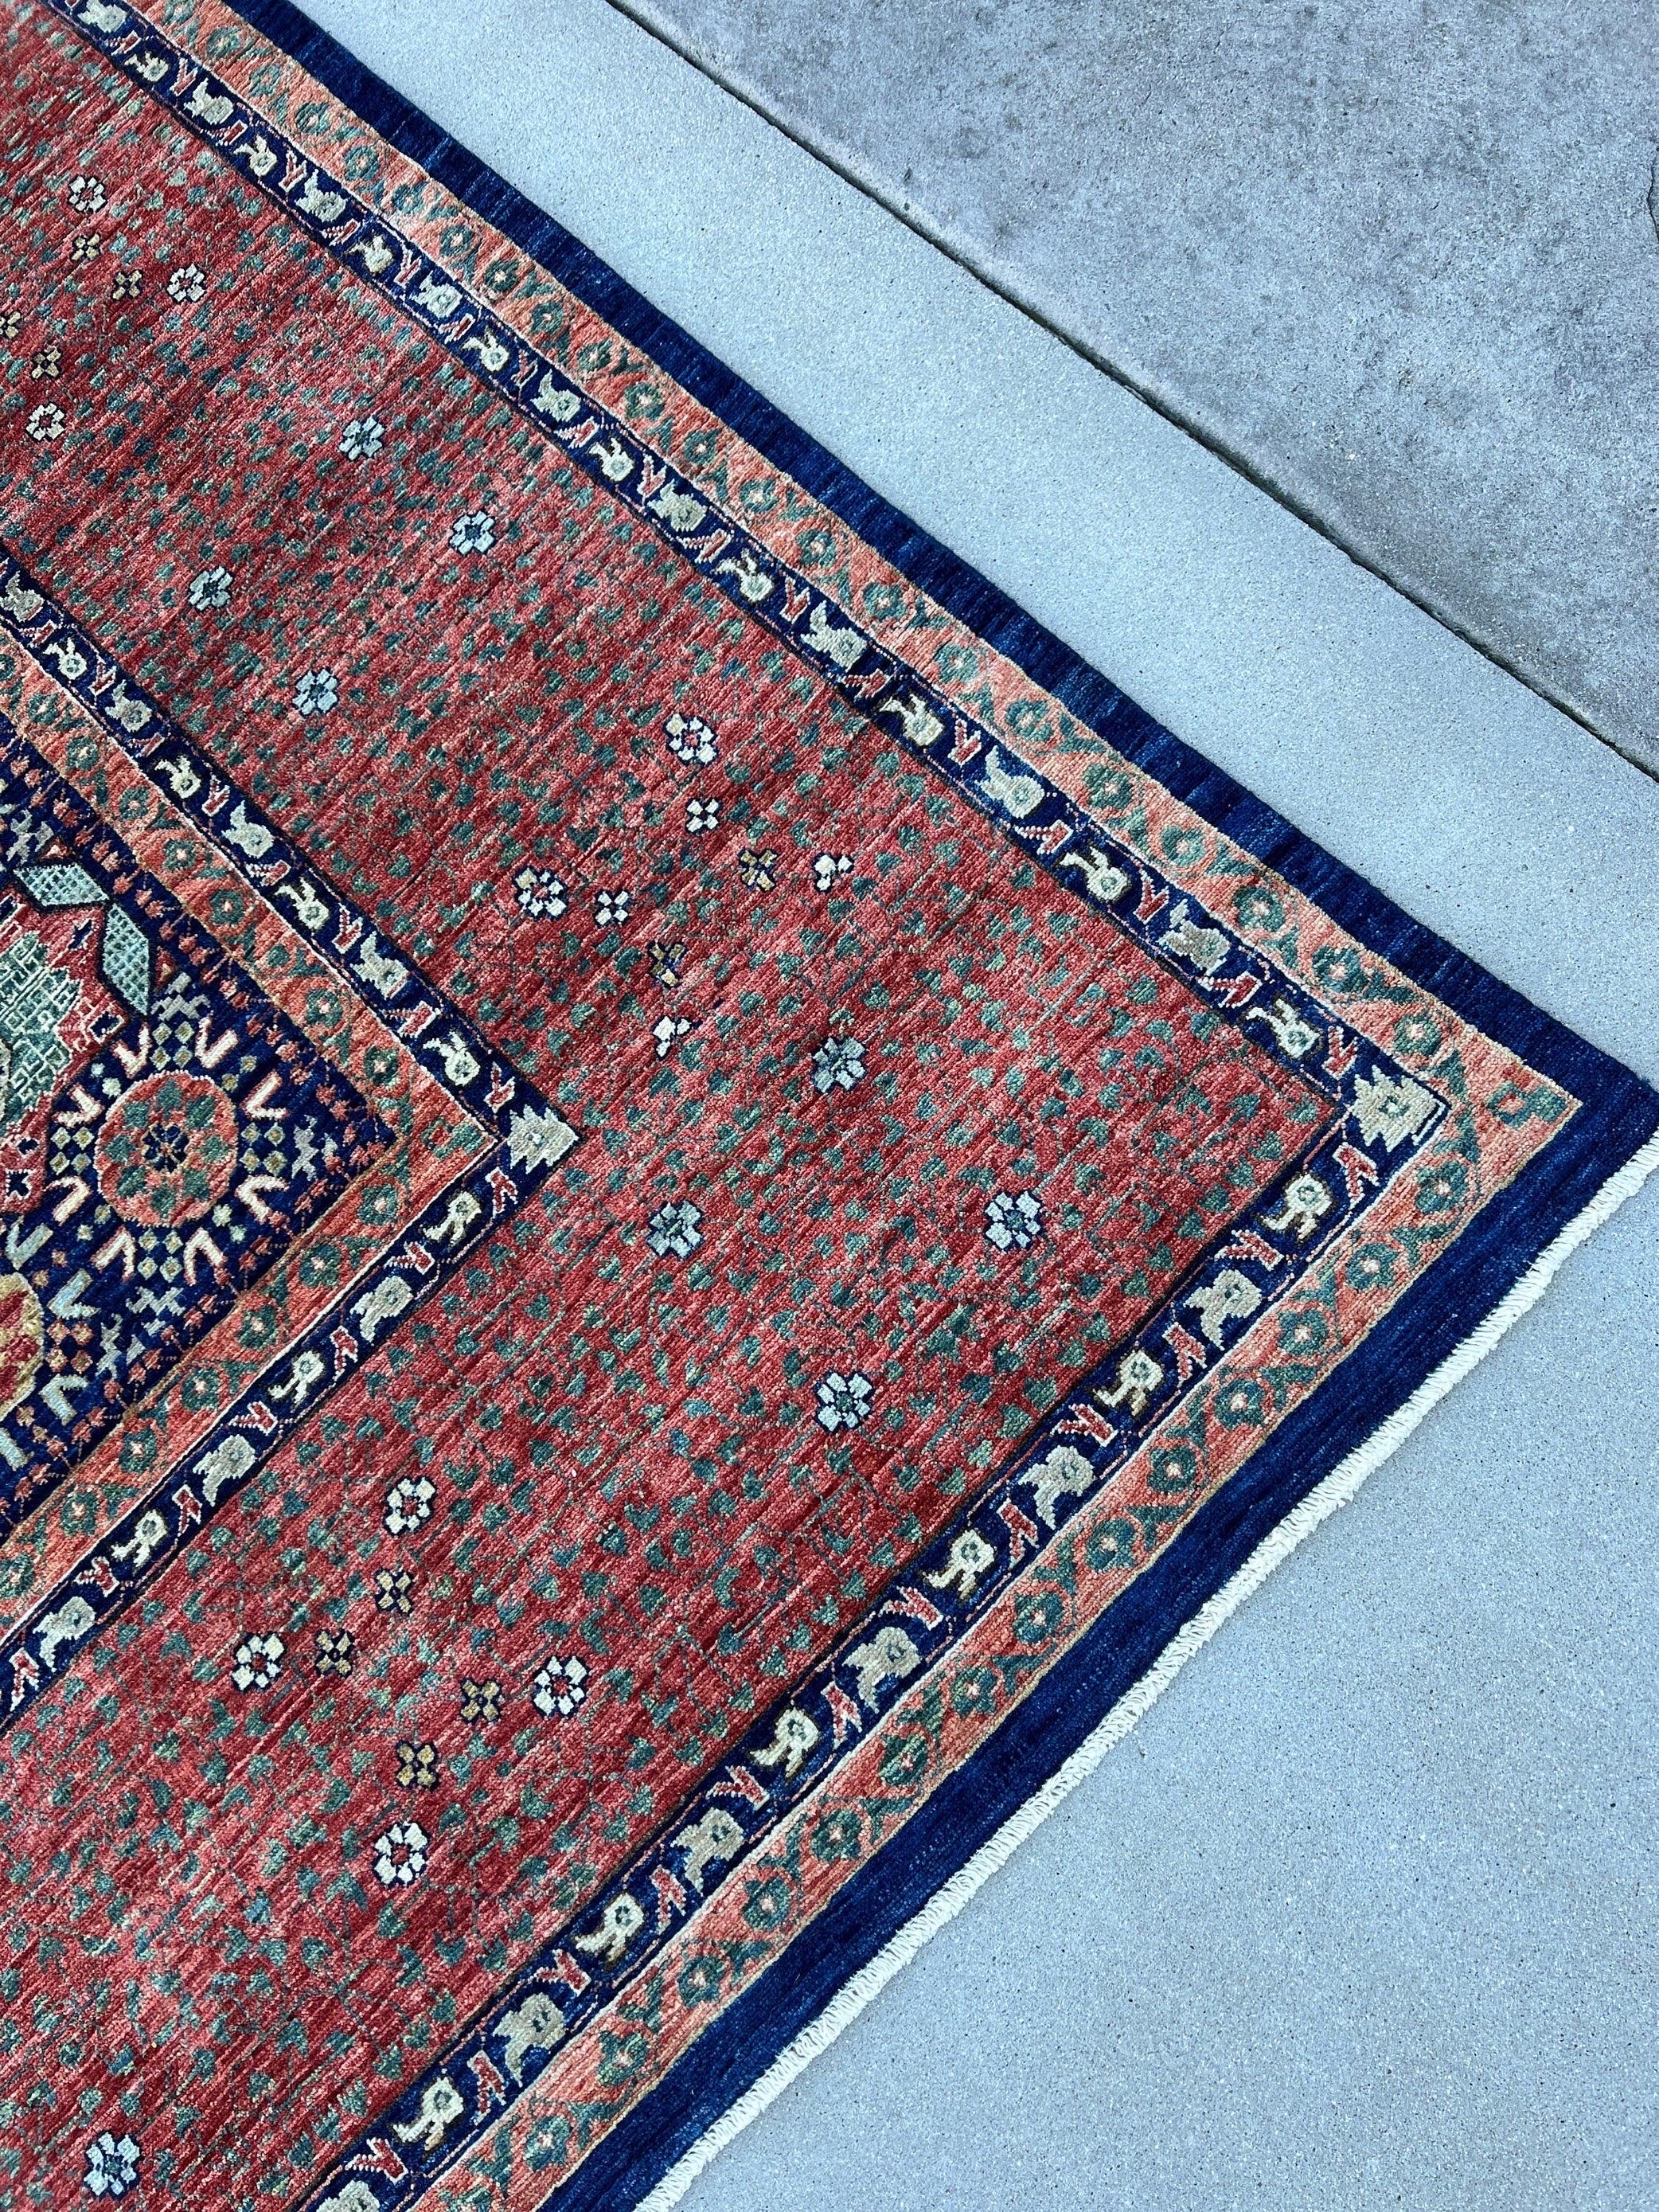 Egyptian Hand-Knotted Afghan Mamluk Area Rug Salmon Pink Red Navy Blue Teal Sage For Sale